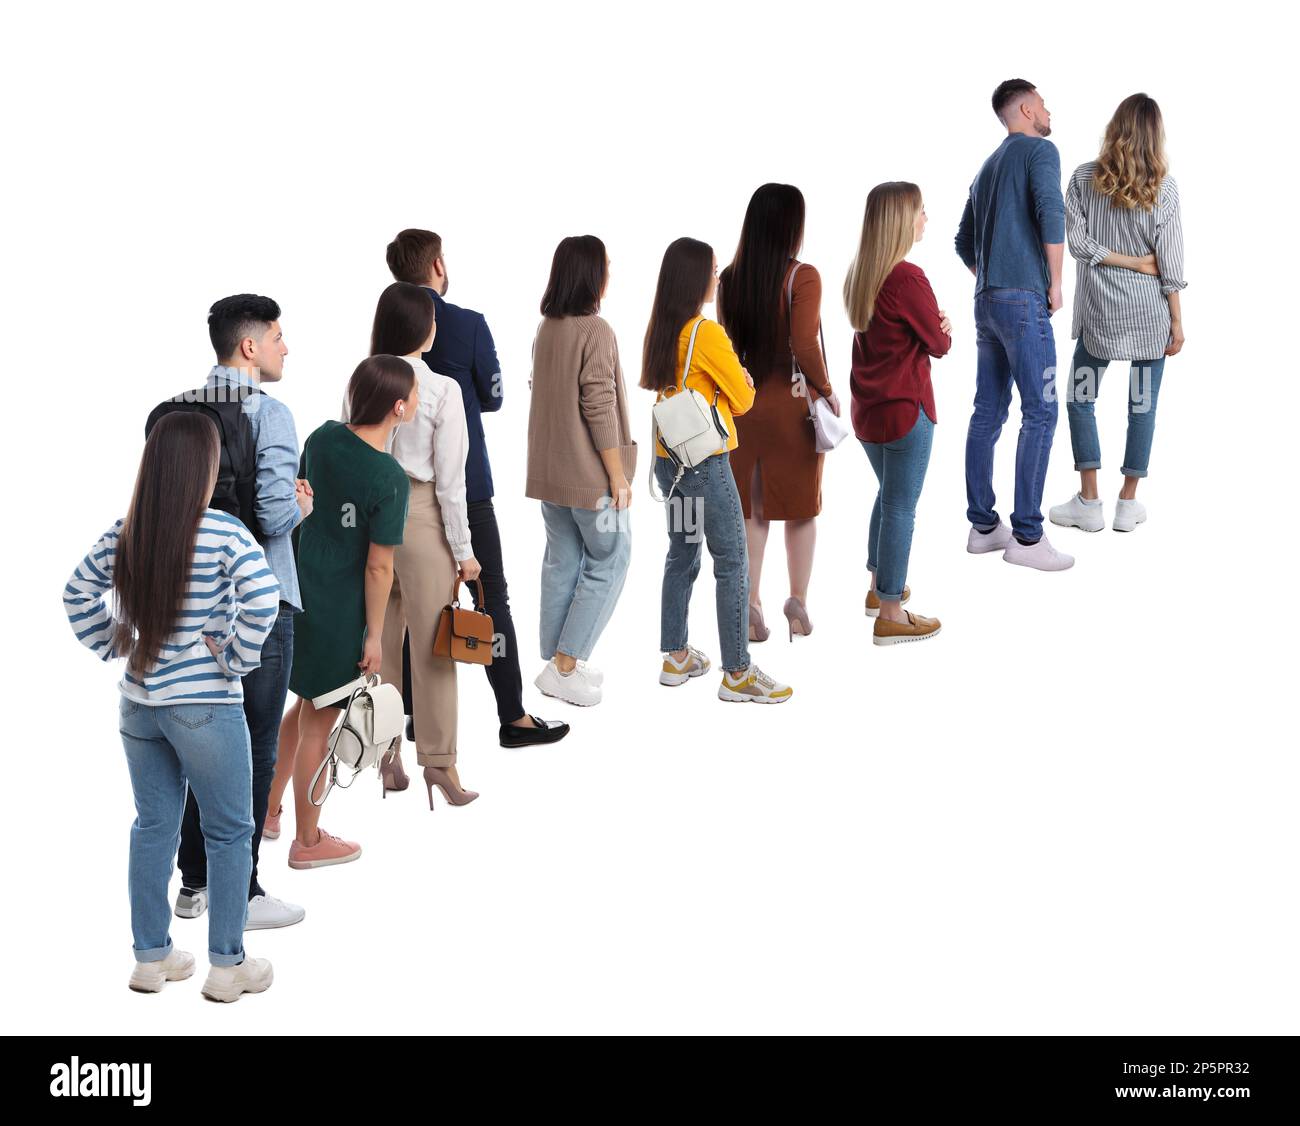 People waiting in queue on white background, back view Stock Photo